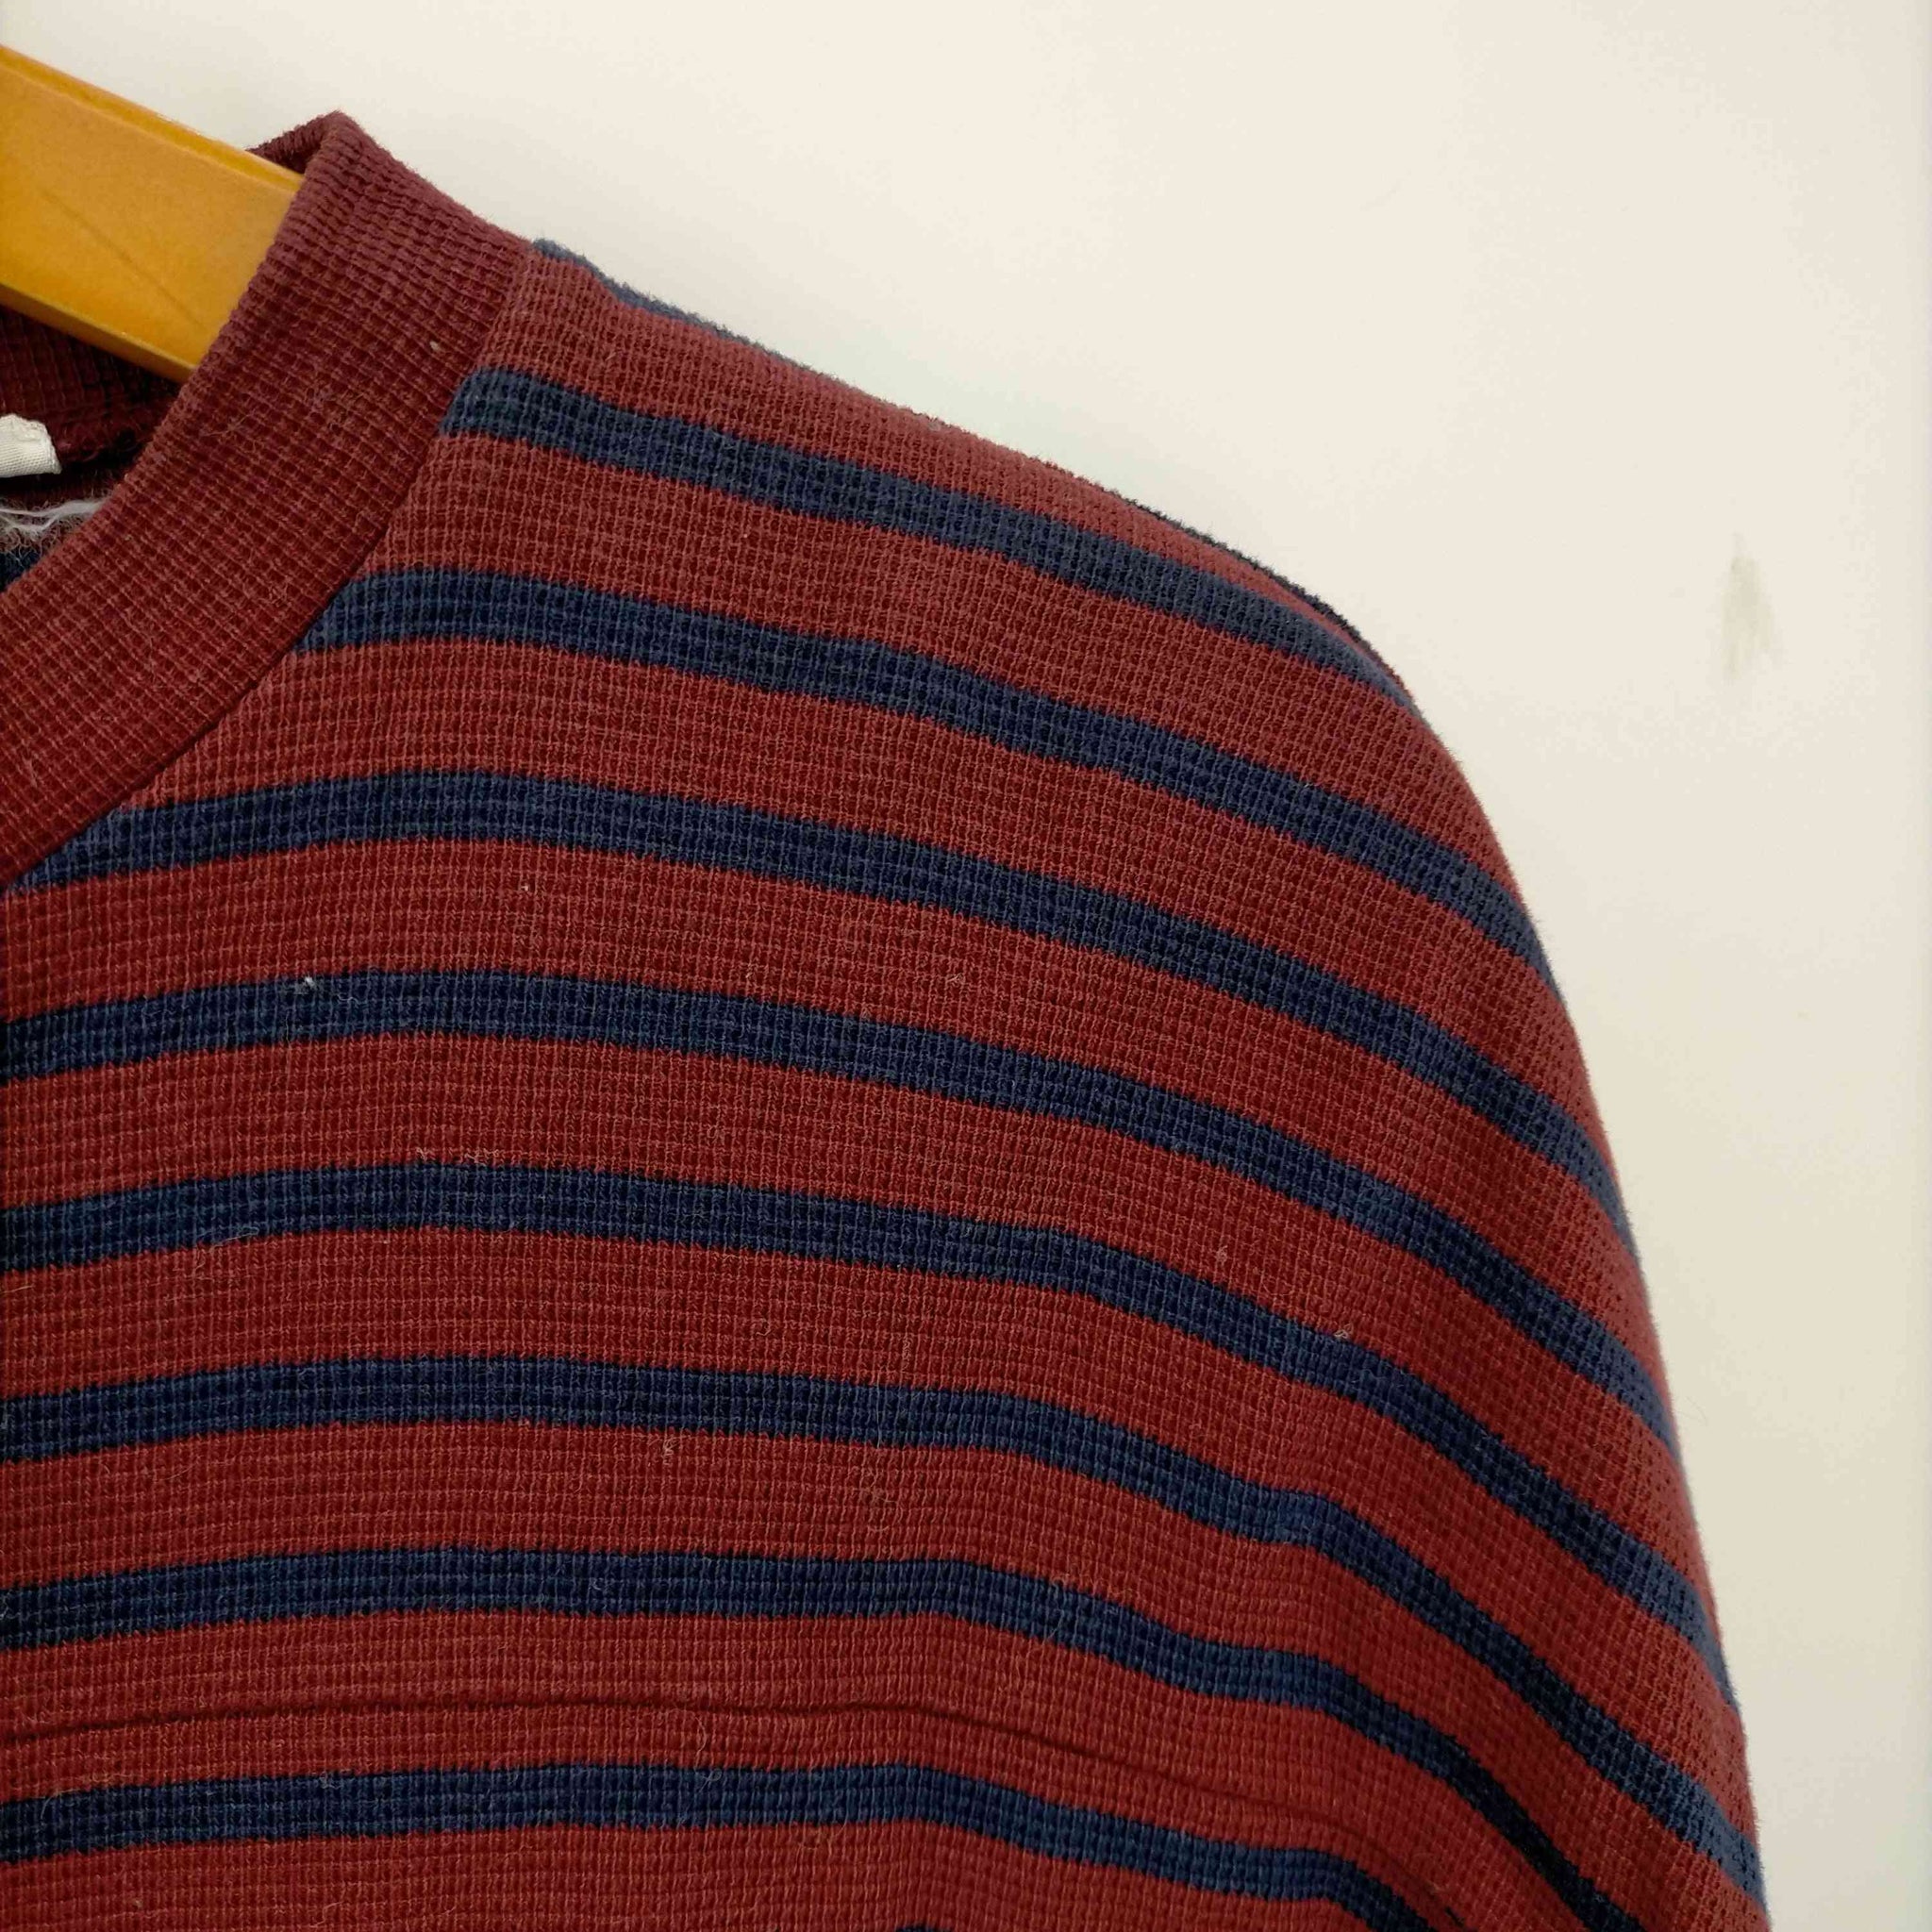 SON OF THE CHEESE(サノバチーズ)SURF KNIT BOARD SHIRTS